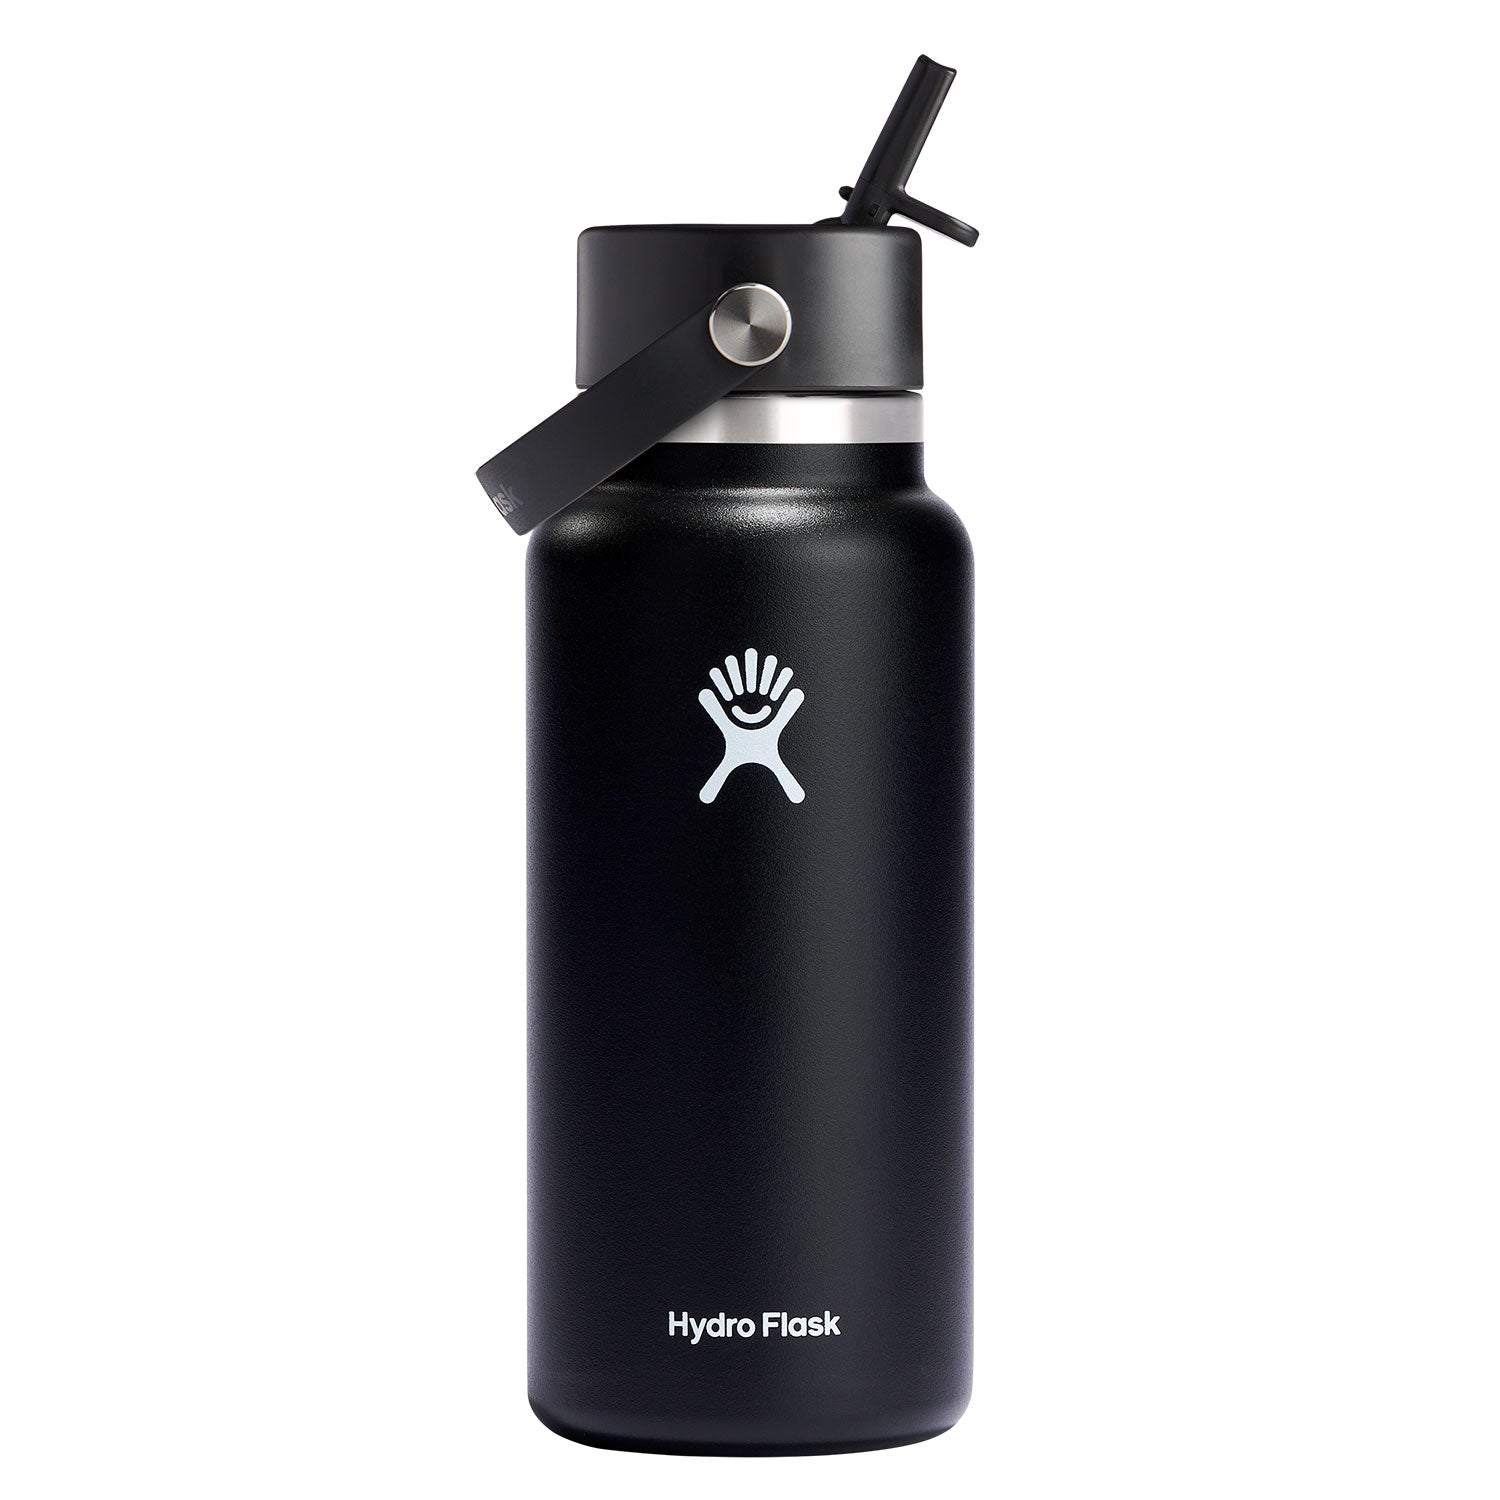 Calculated Survival 24 oz. Water Bottle with Straw